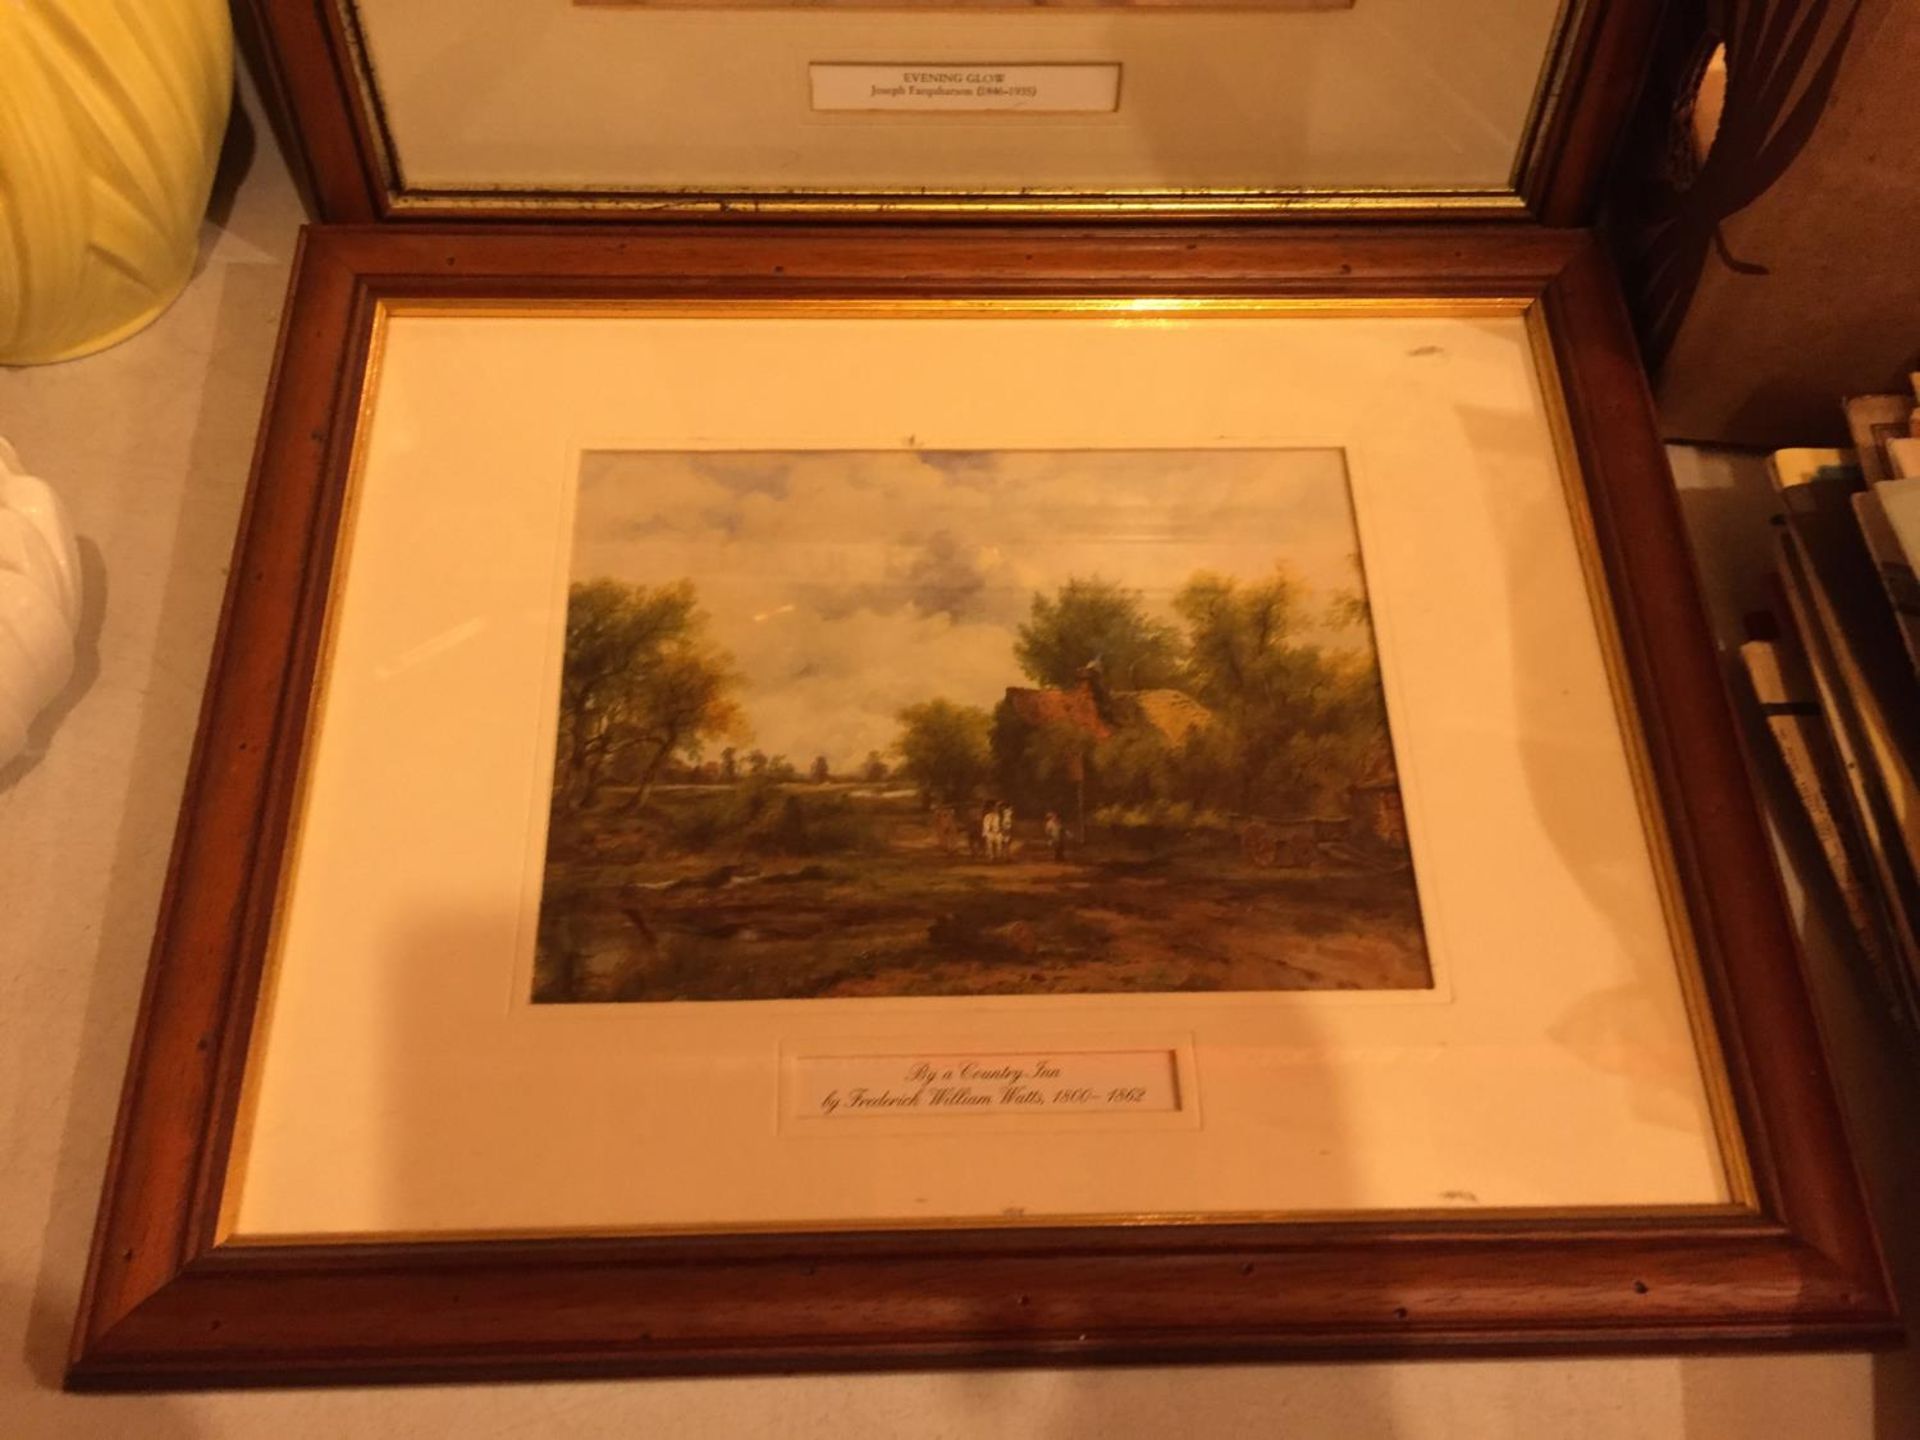 FOUR FRAMED PICTURES, TWO BY FREDERICK WILLIAM WATTS AND TWO BY JOSEPH FARQUHARSON, DEPICTING - Image 4 of 5